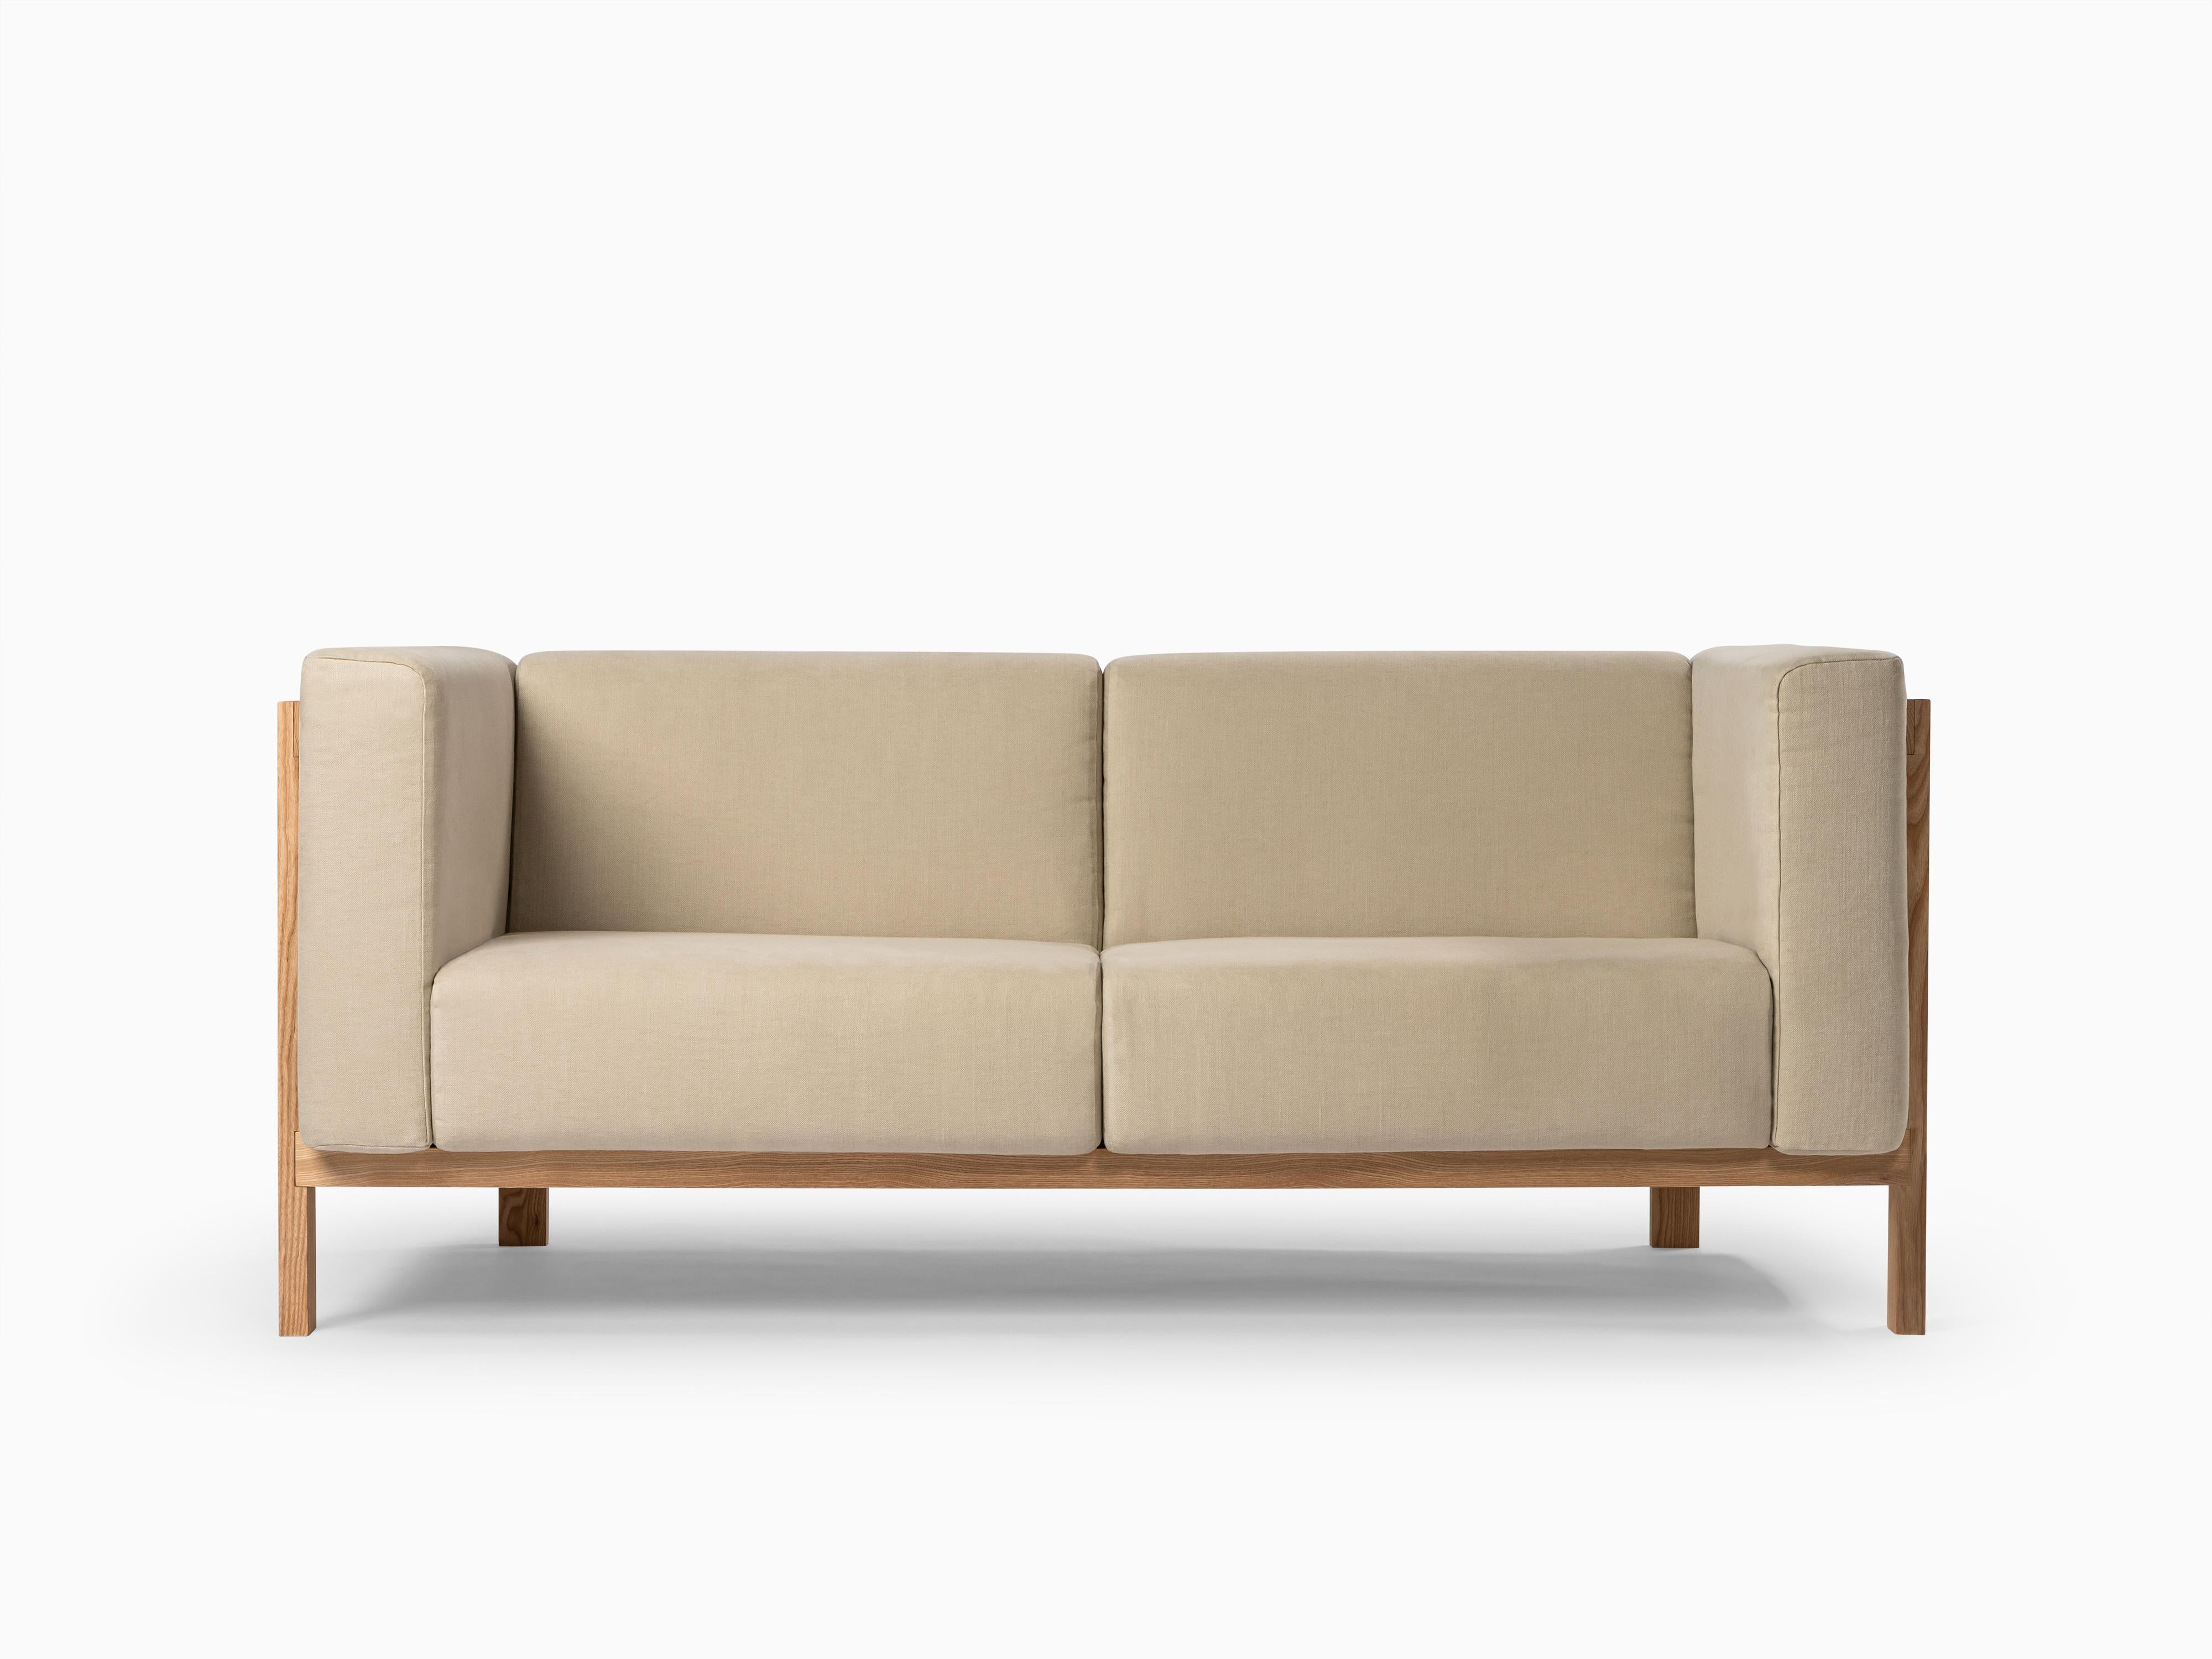 Inspired by the graceful mechanics of elevators, the LIFT sofa takes both its name and aesthetic cues from this influence. Created by the hands of Julien Renault, this masterpiece pays homage to refined design, expert craftsmanship, and unparalleled